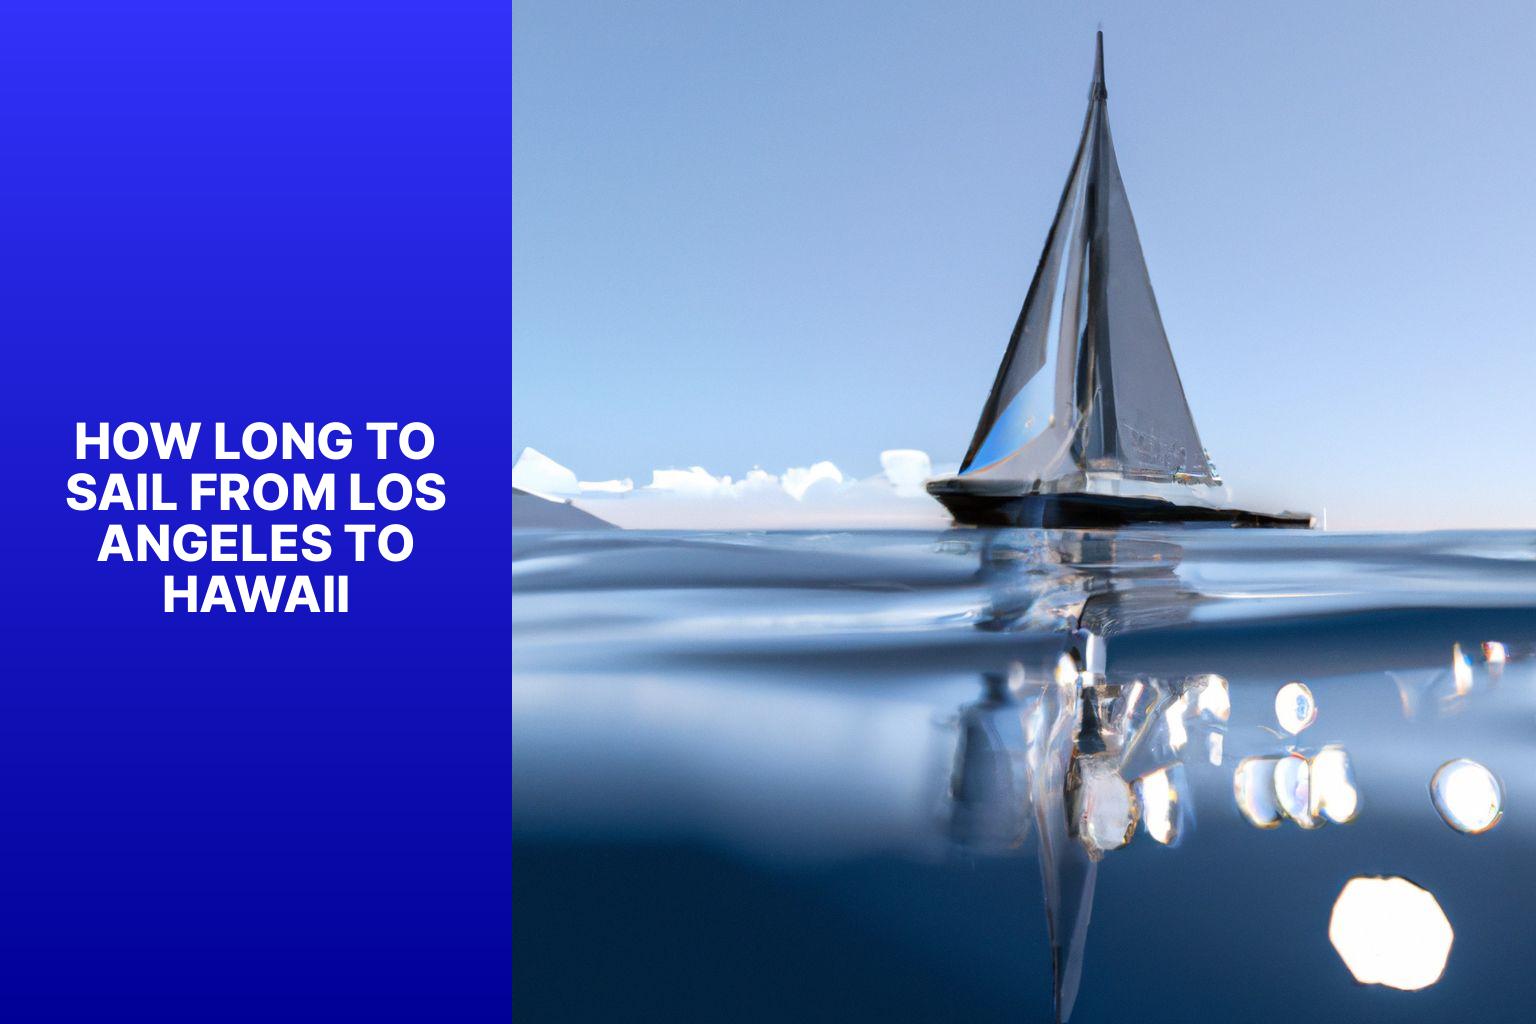 Time of Journey: Sailing Duration from Los Angeles to Hawaii